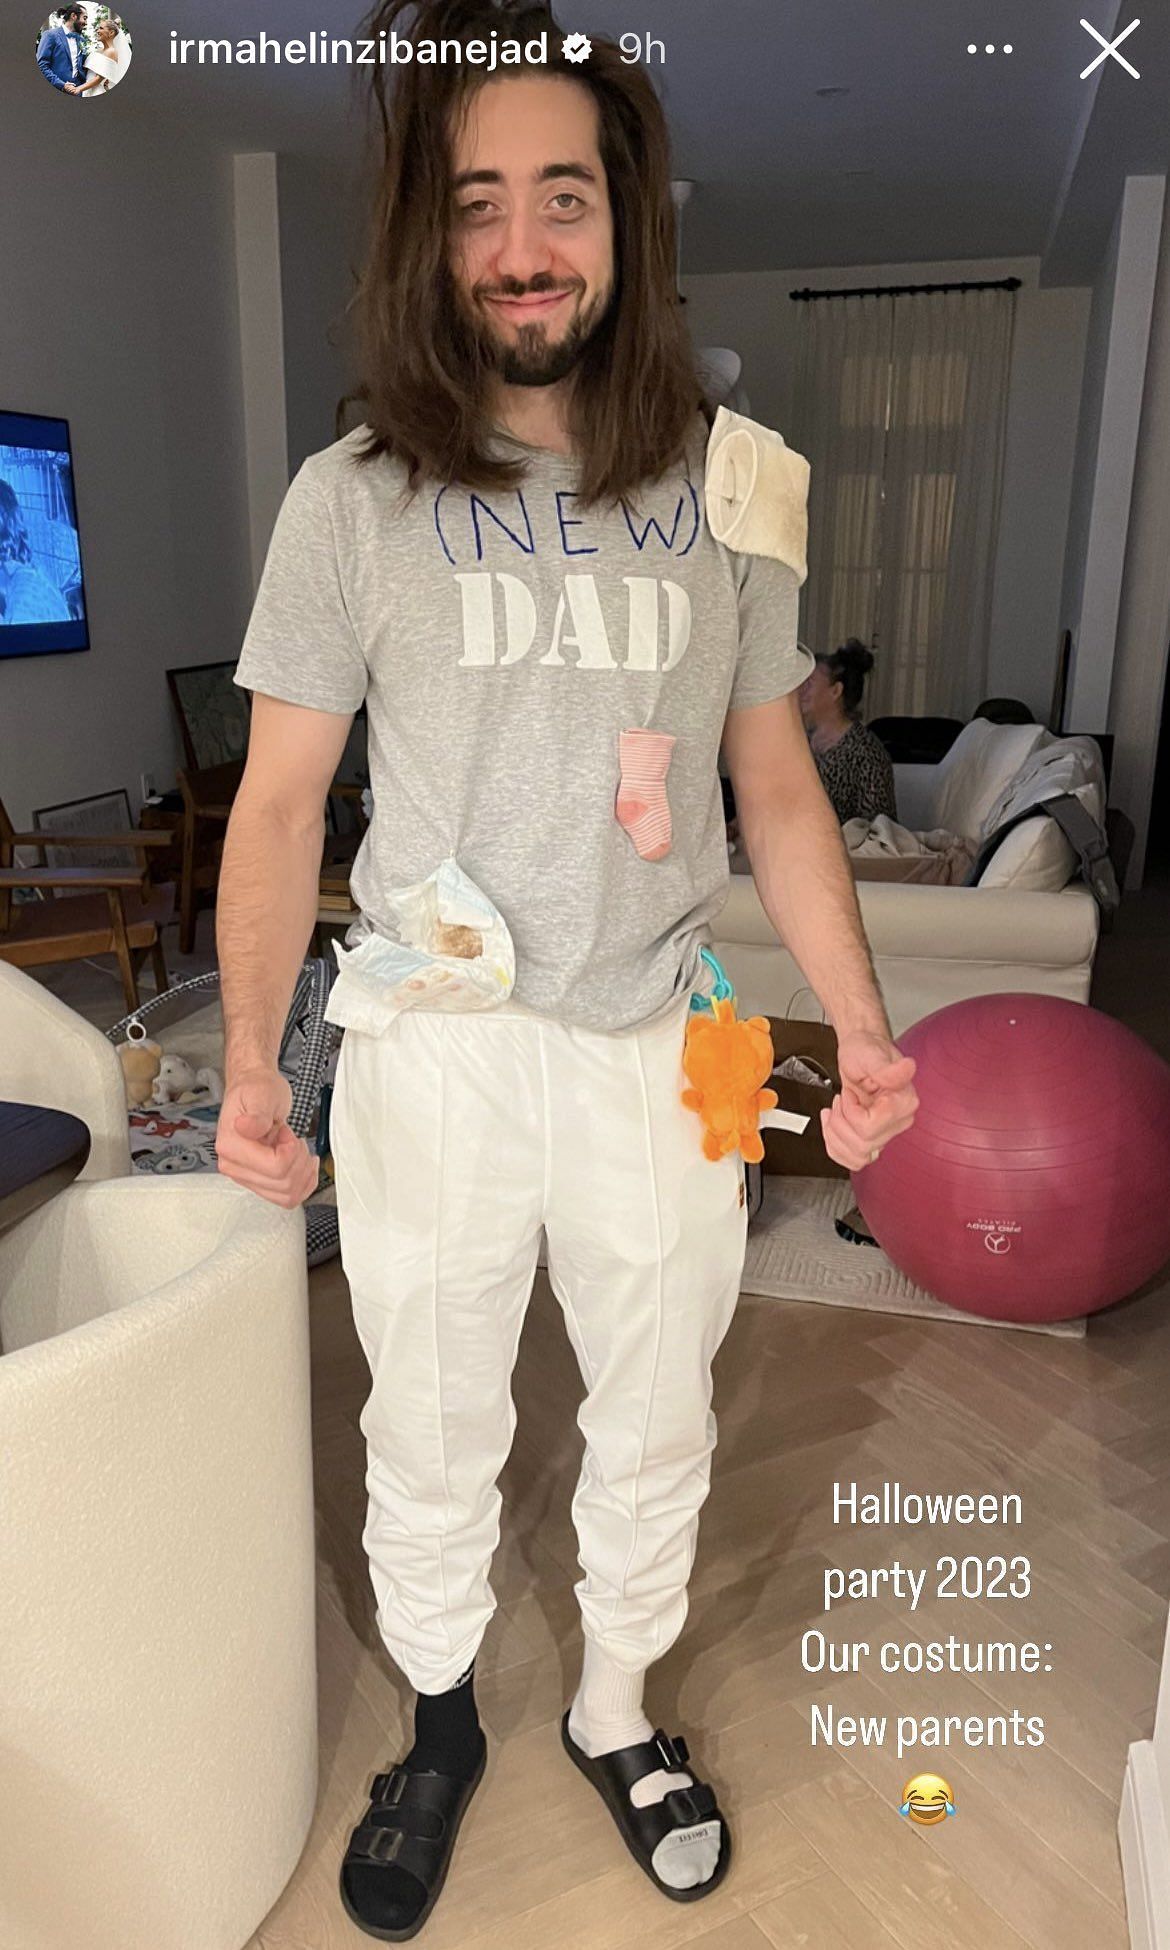 Mika Zibanejad and his wife Irma are taking their new parent struggles to the max with Halloween costumes 😭 (Image Credit: viairmahelinzibanejad/IG)